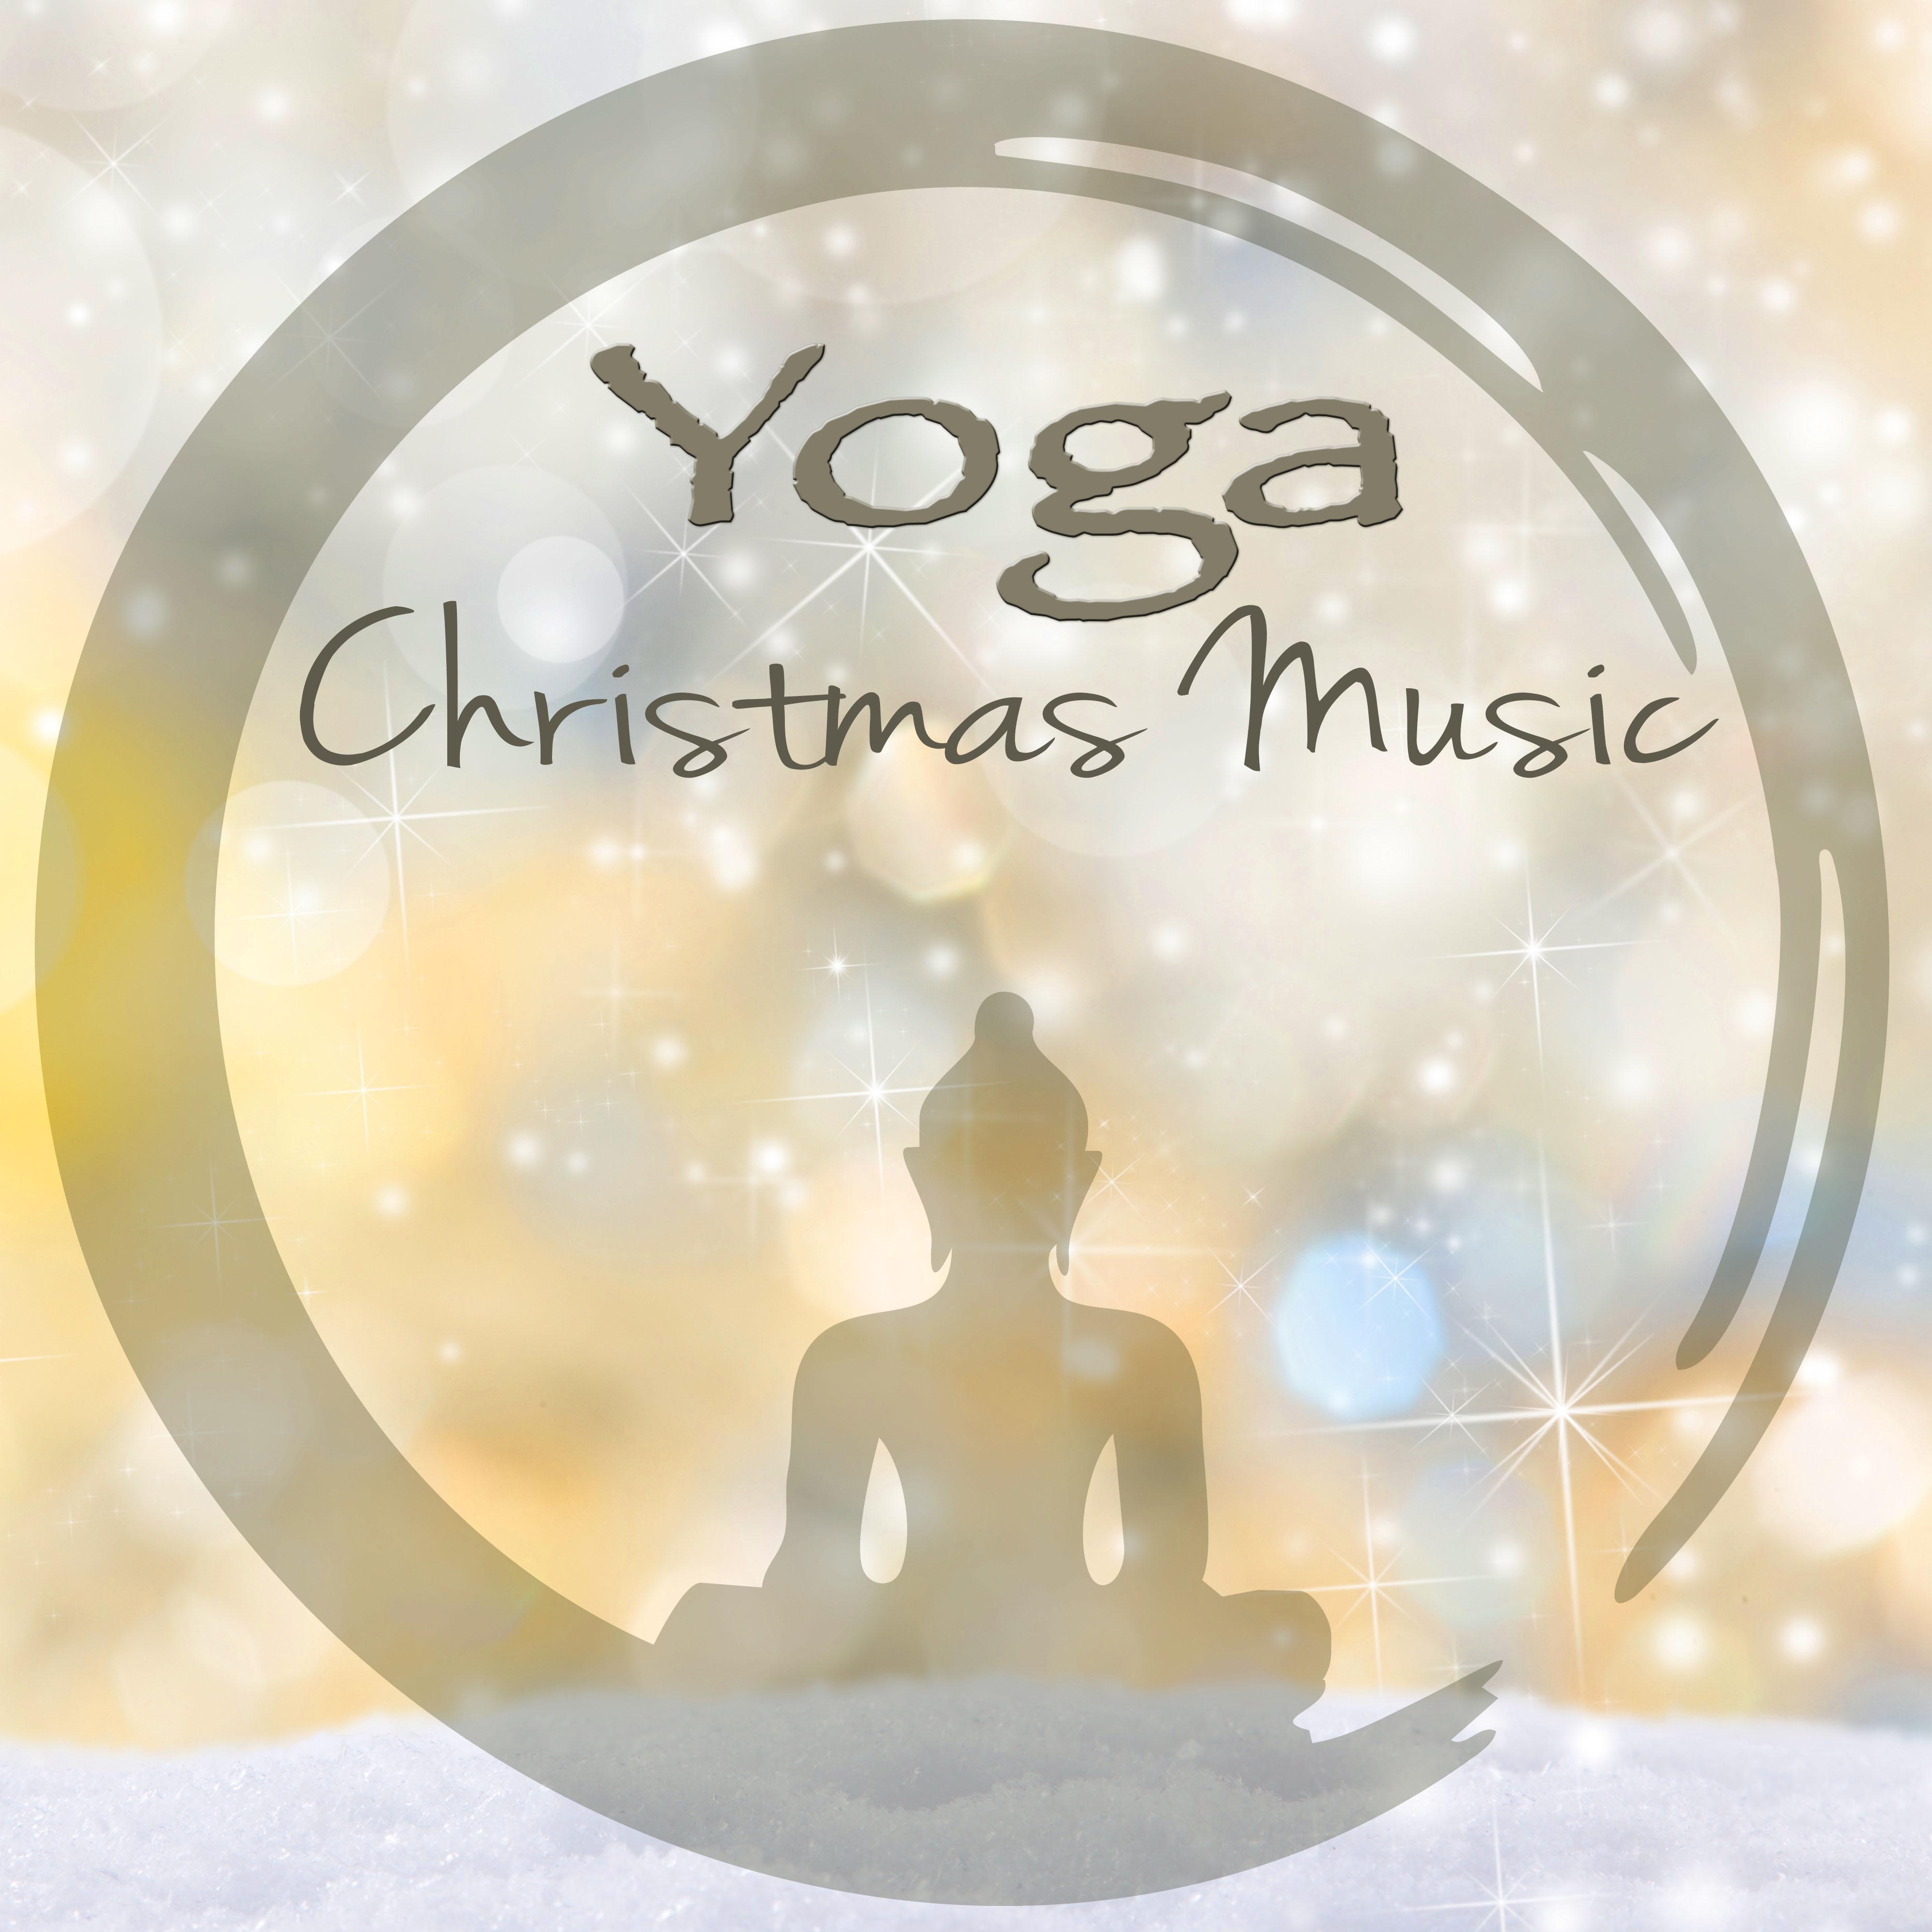 Yoga, Christmas Music  50 Christmas Classics  Emotional Nature Sounds Relaxing Songs for Yoga Classes, Yoga Space Background Music